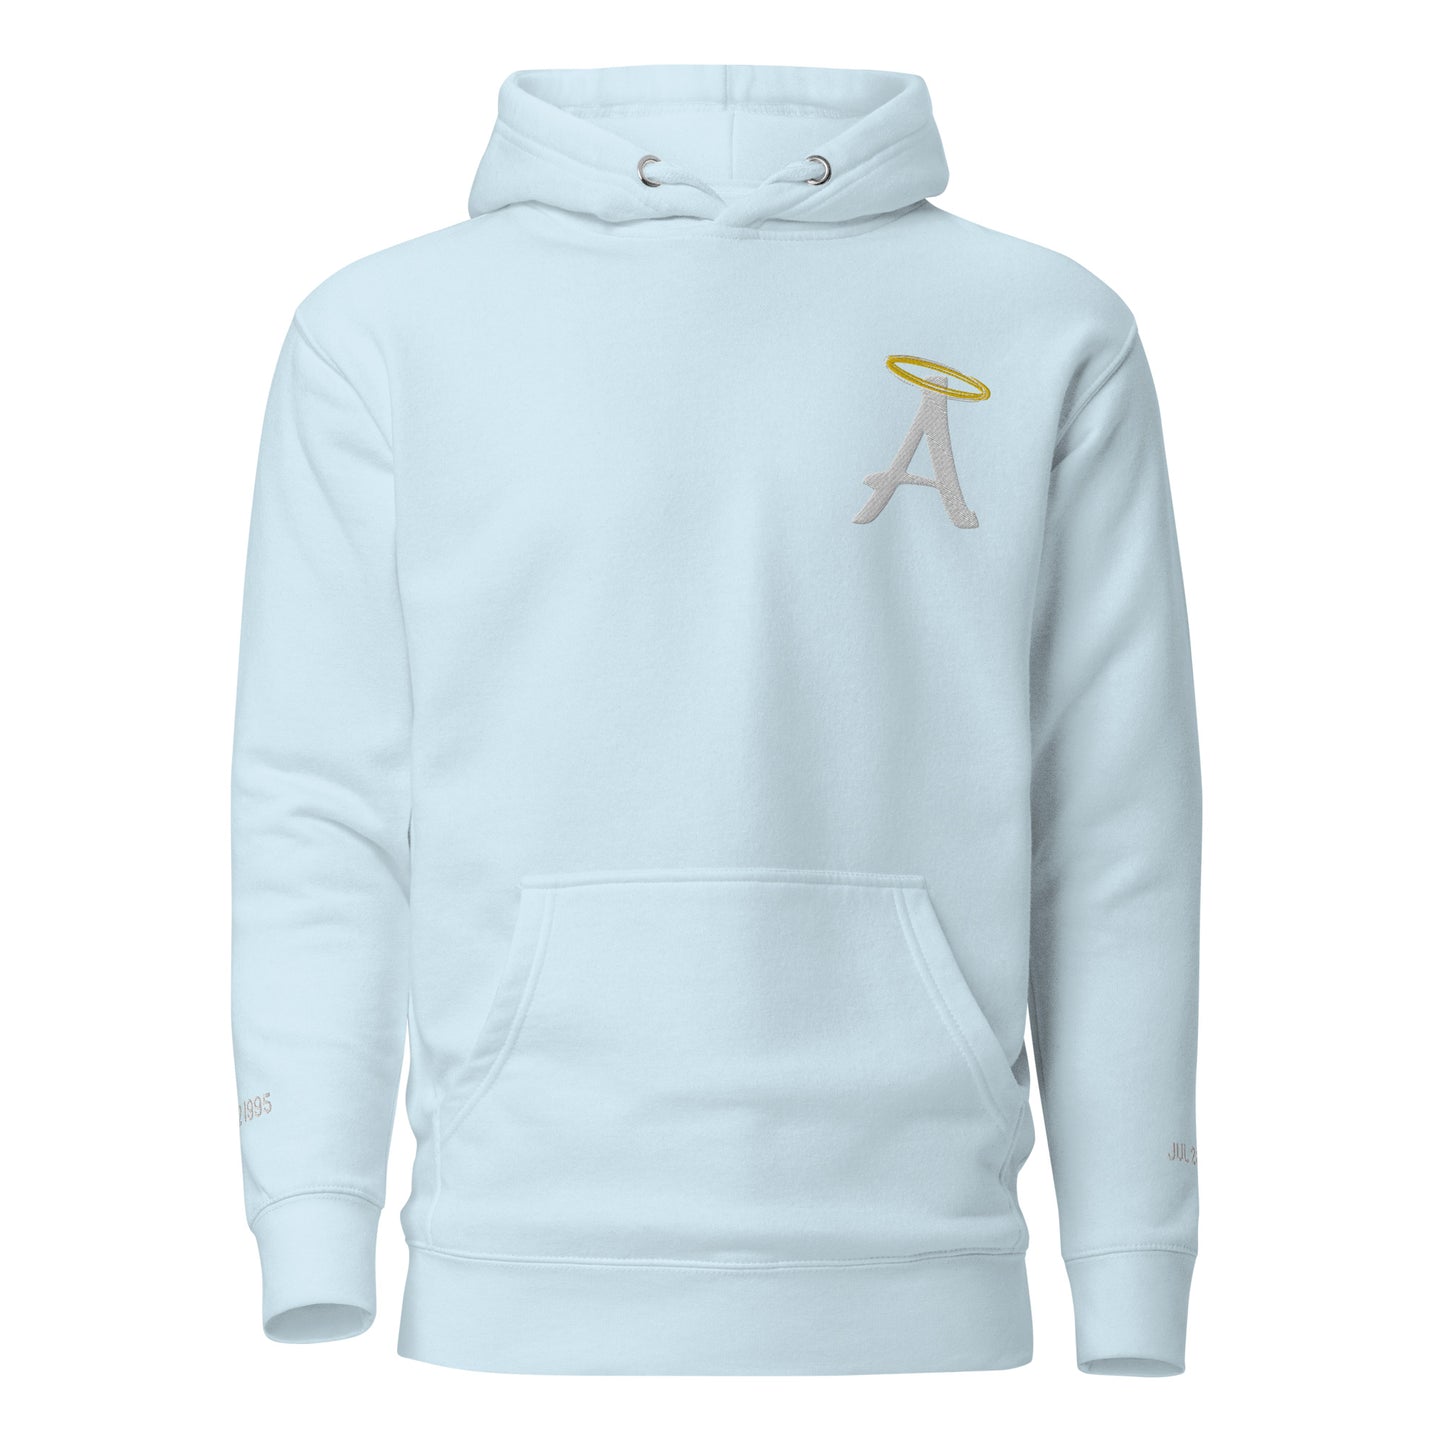 A Halo Embroidered Hoodie